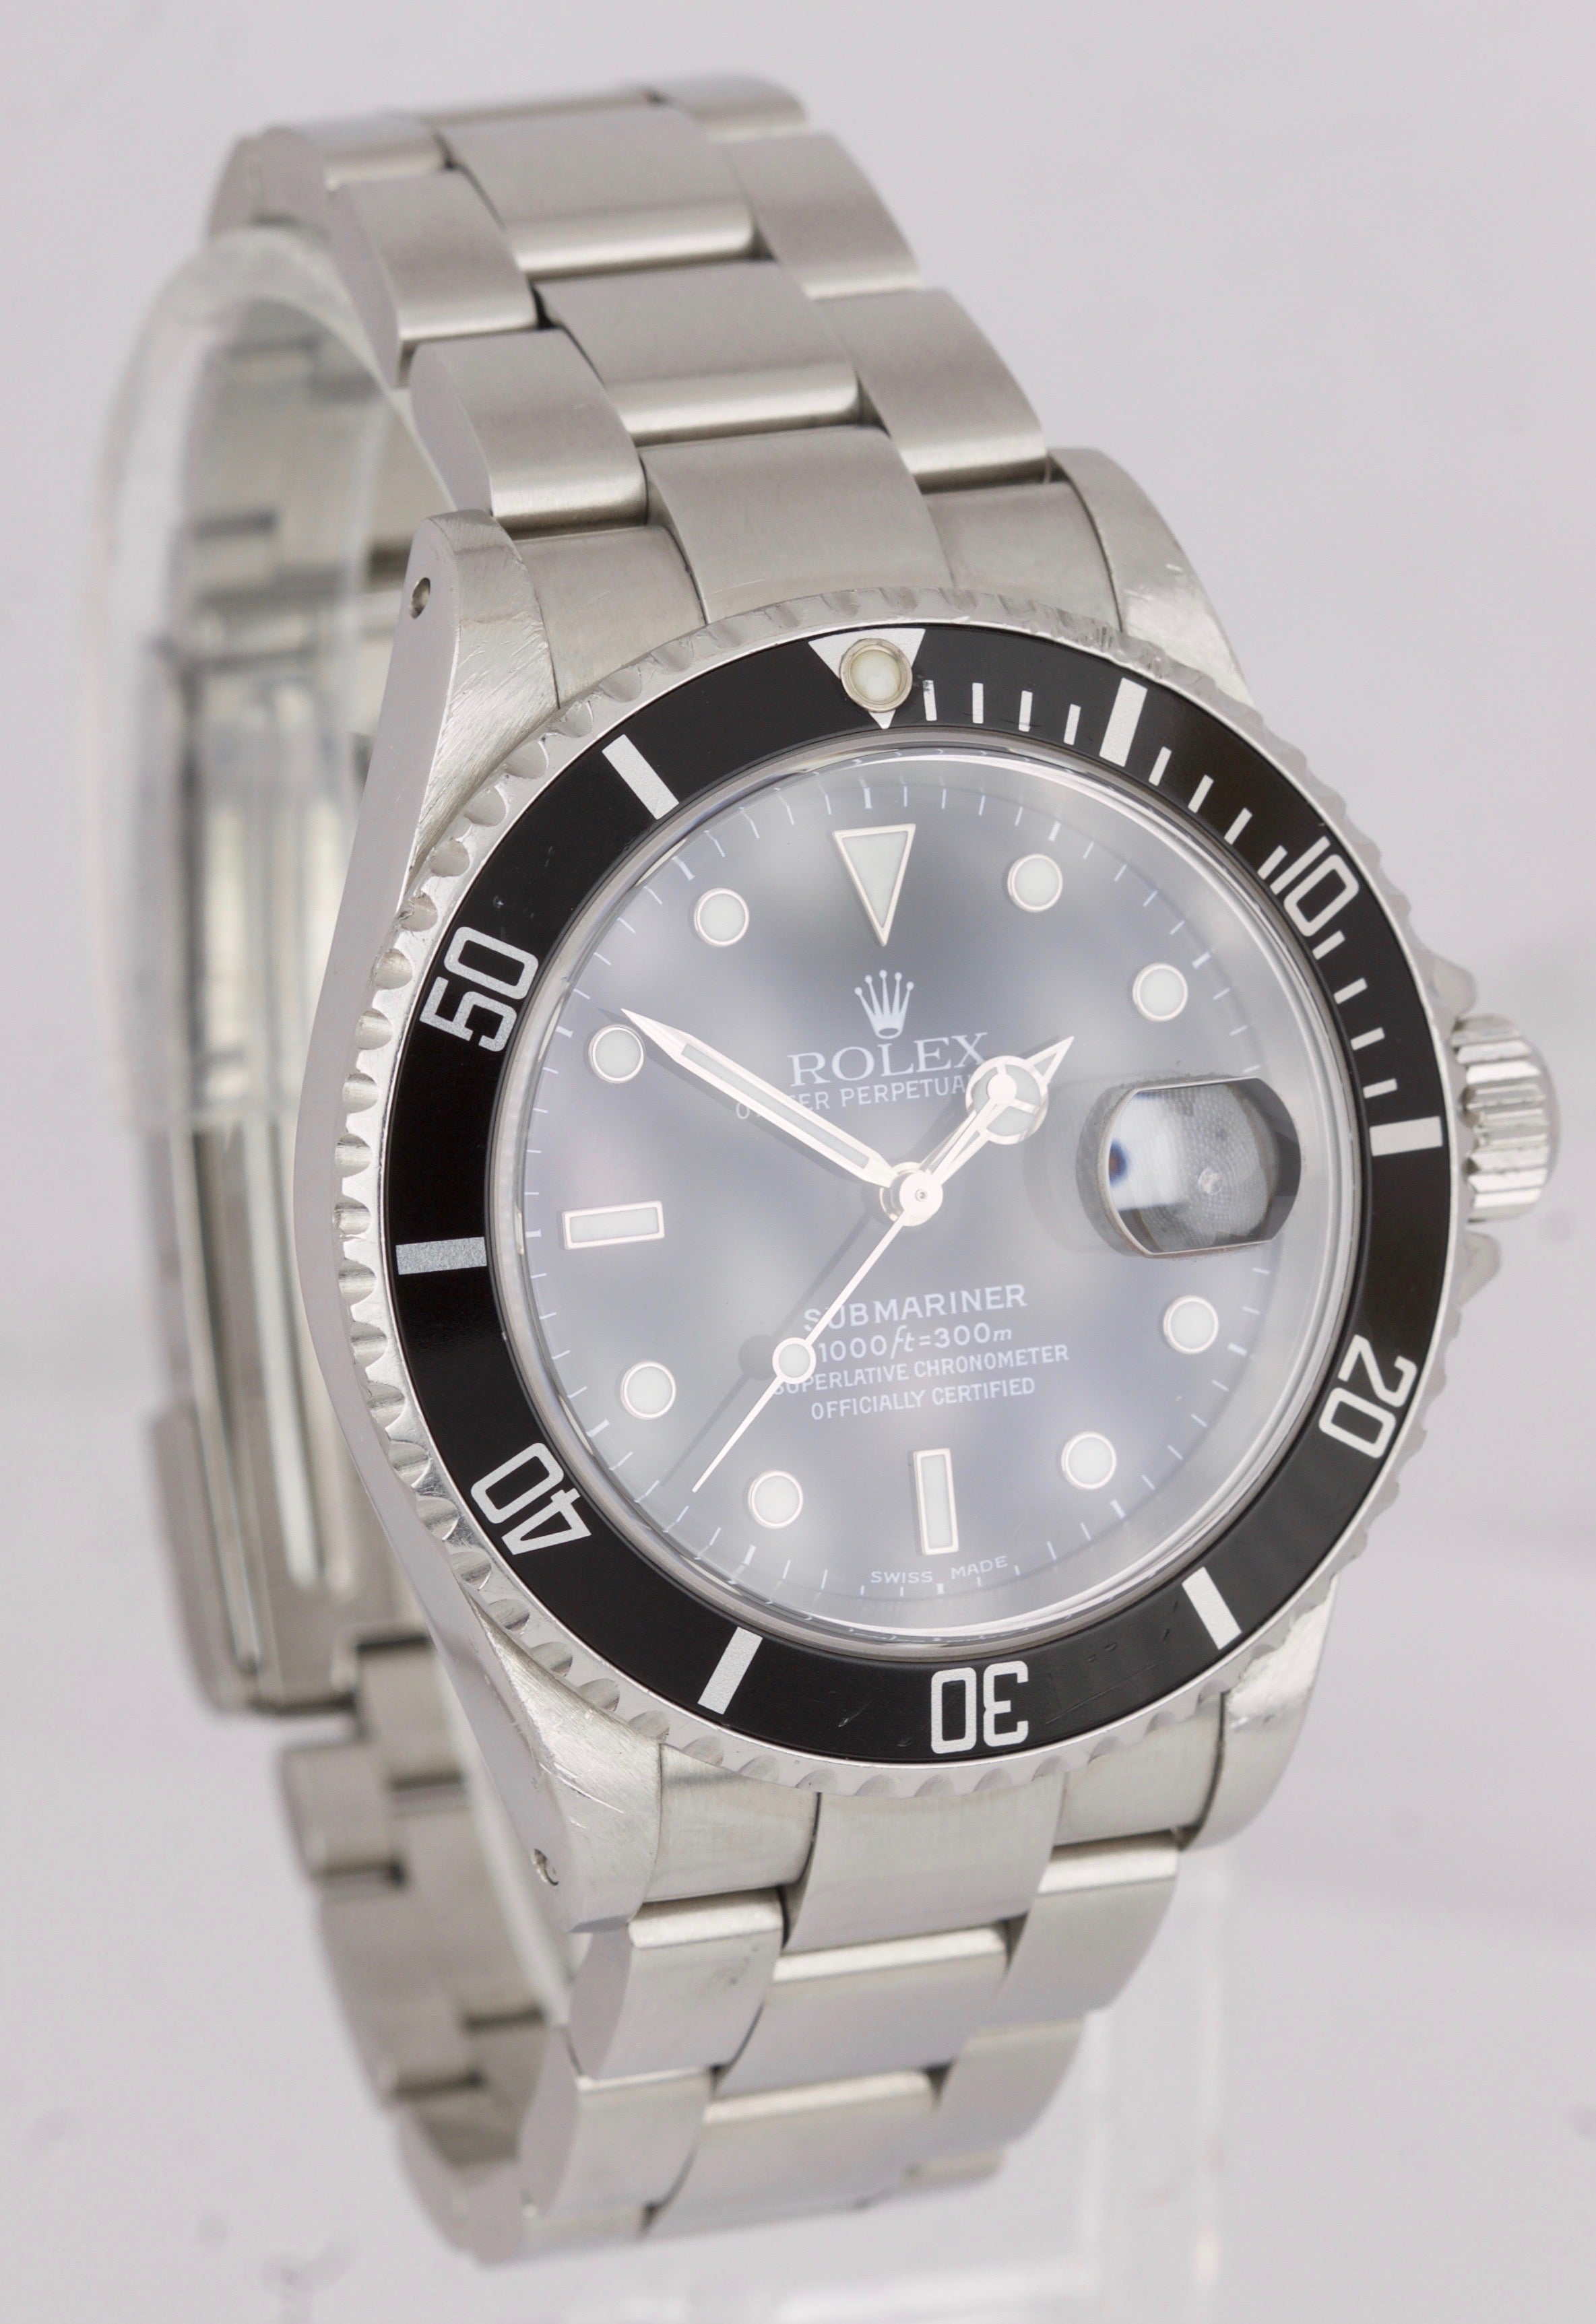 2000 UNPOLISHED Rolex Submariner Date 16610 A SERIAL Stainless 40mm Dive Watch